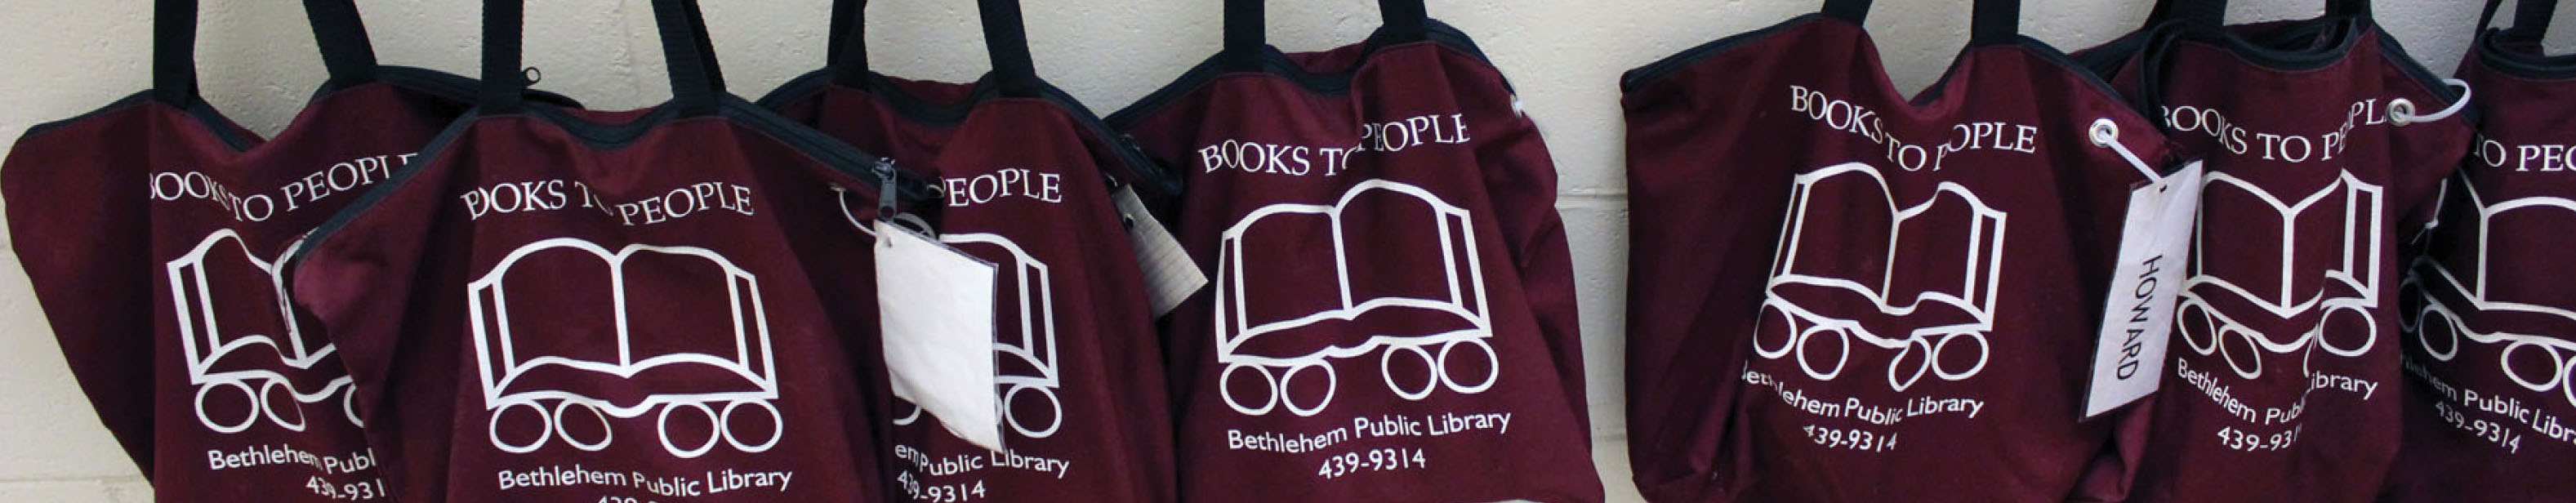 books-to-people-banner